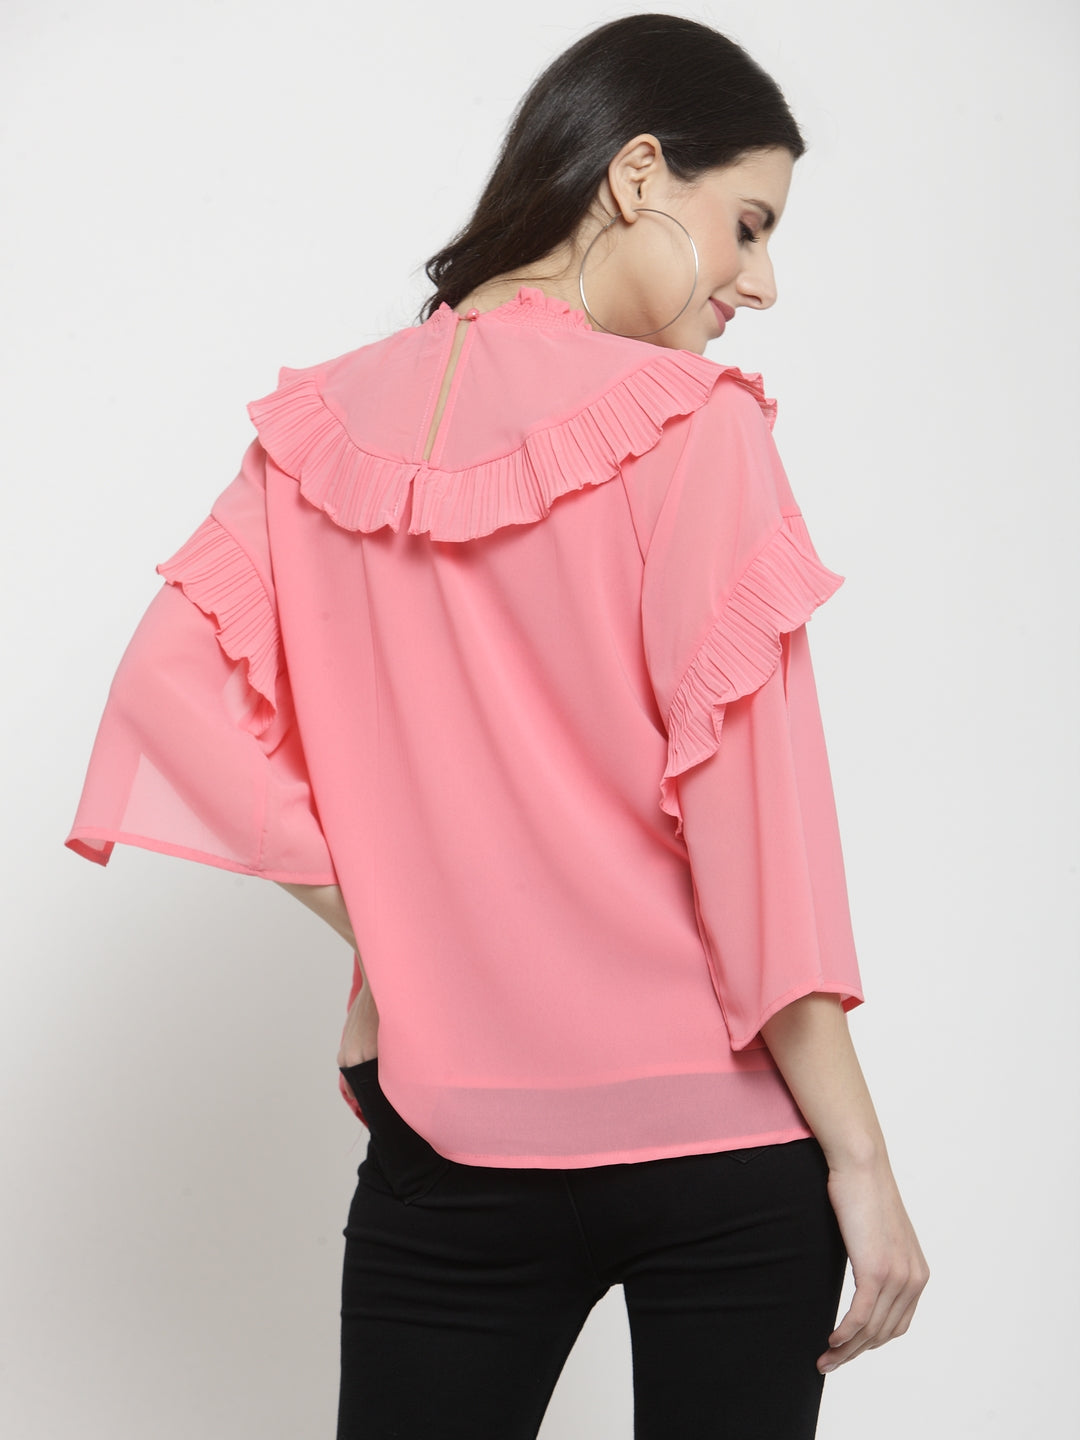 Women Solid Peach Round Neck Top With Frills